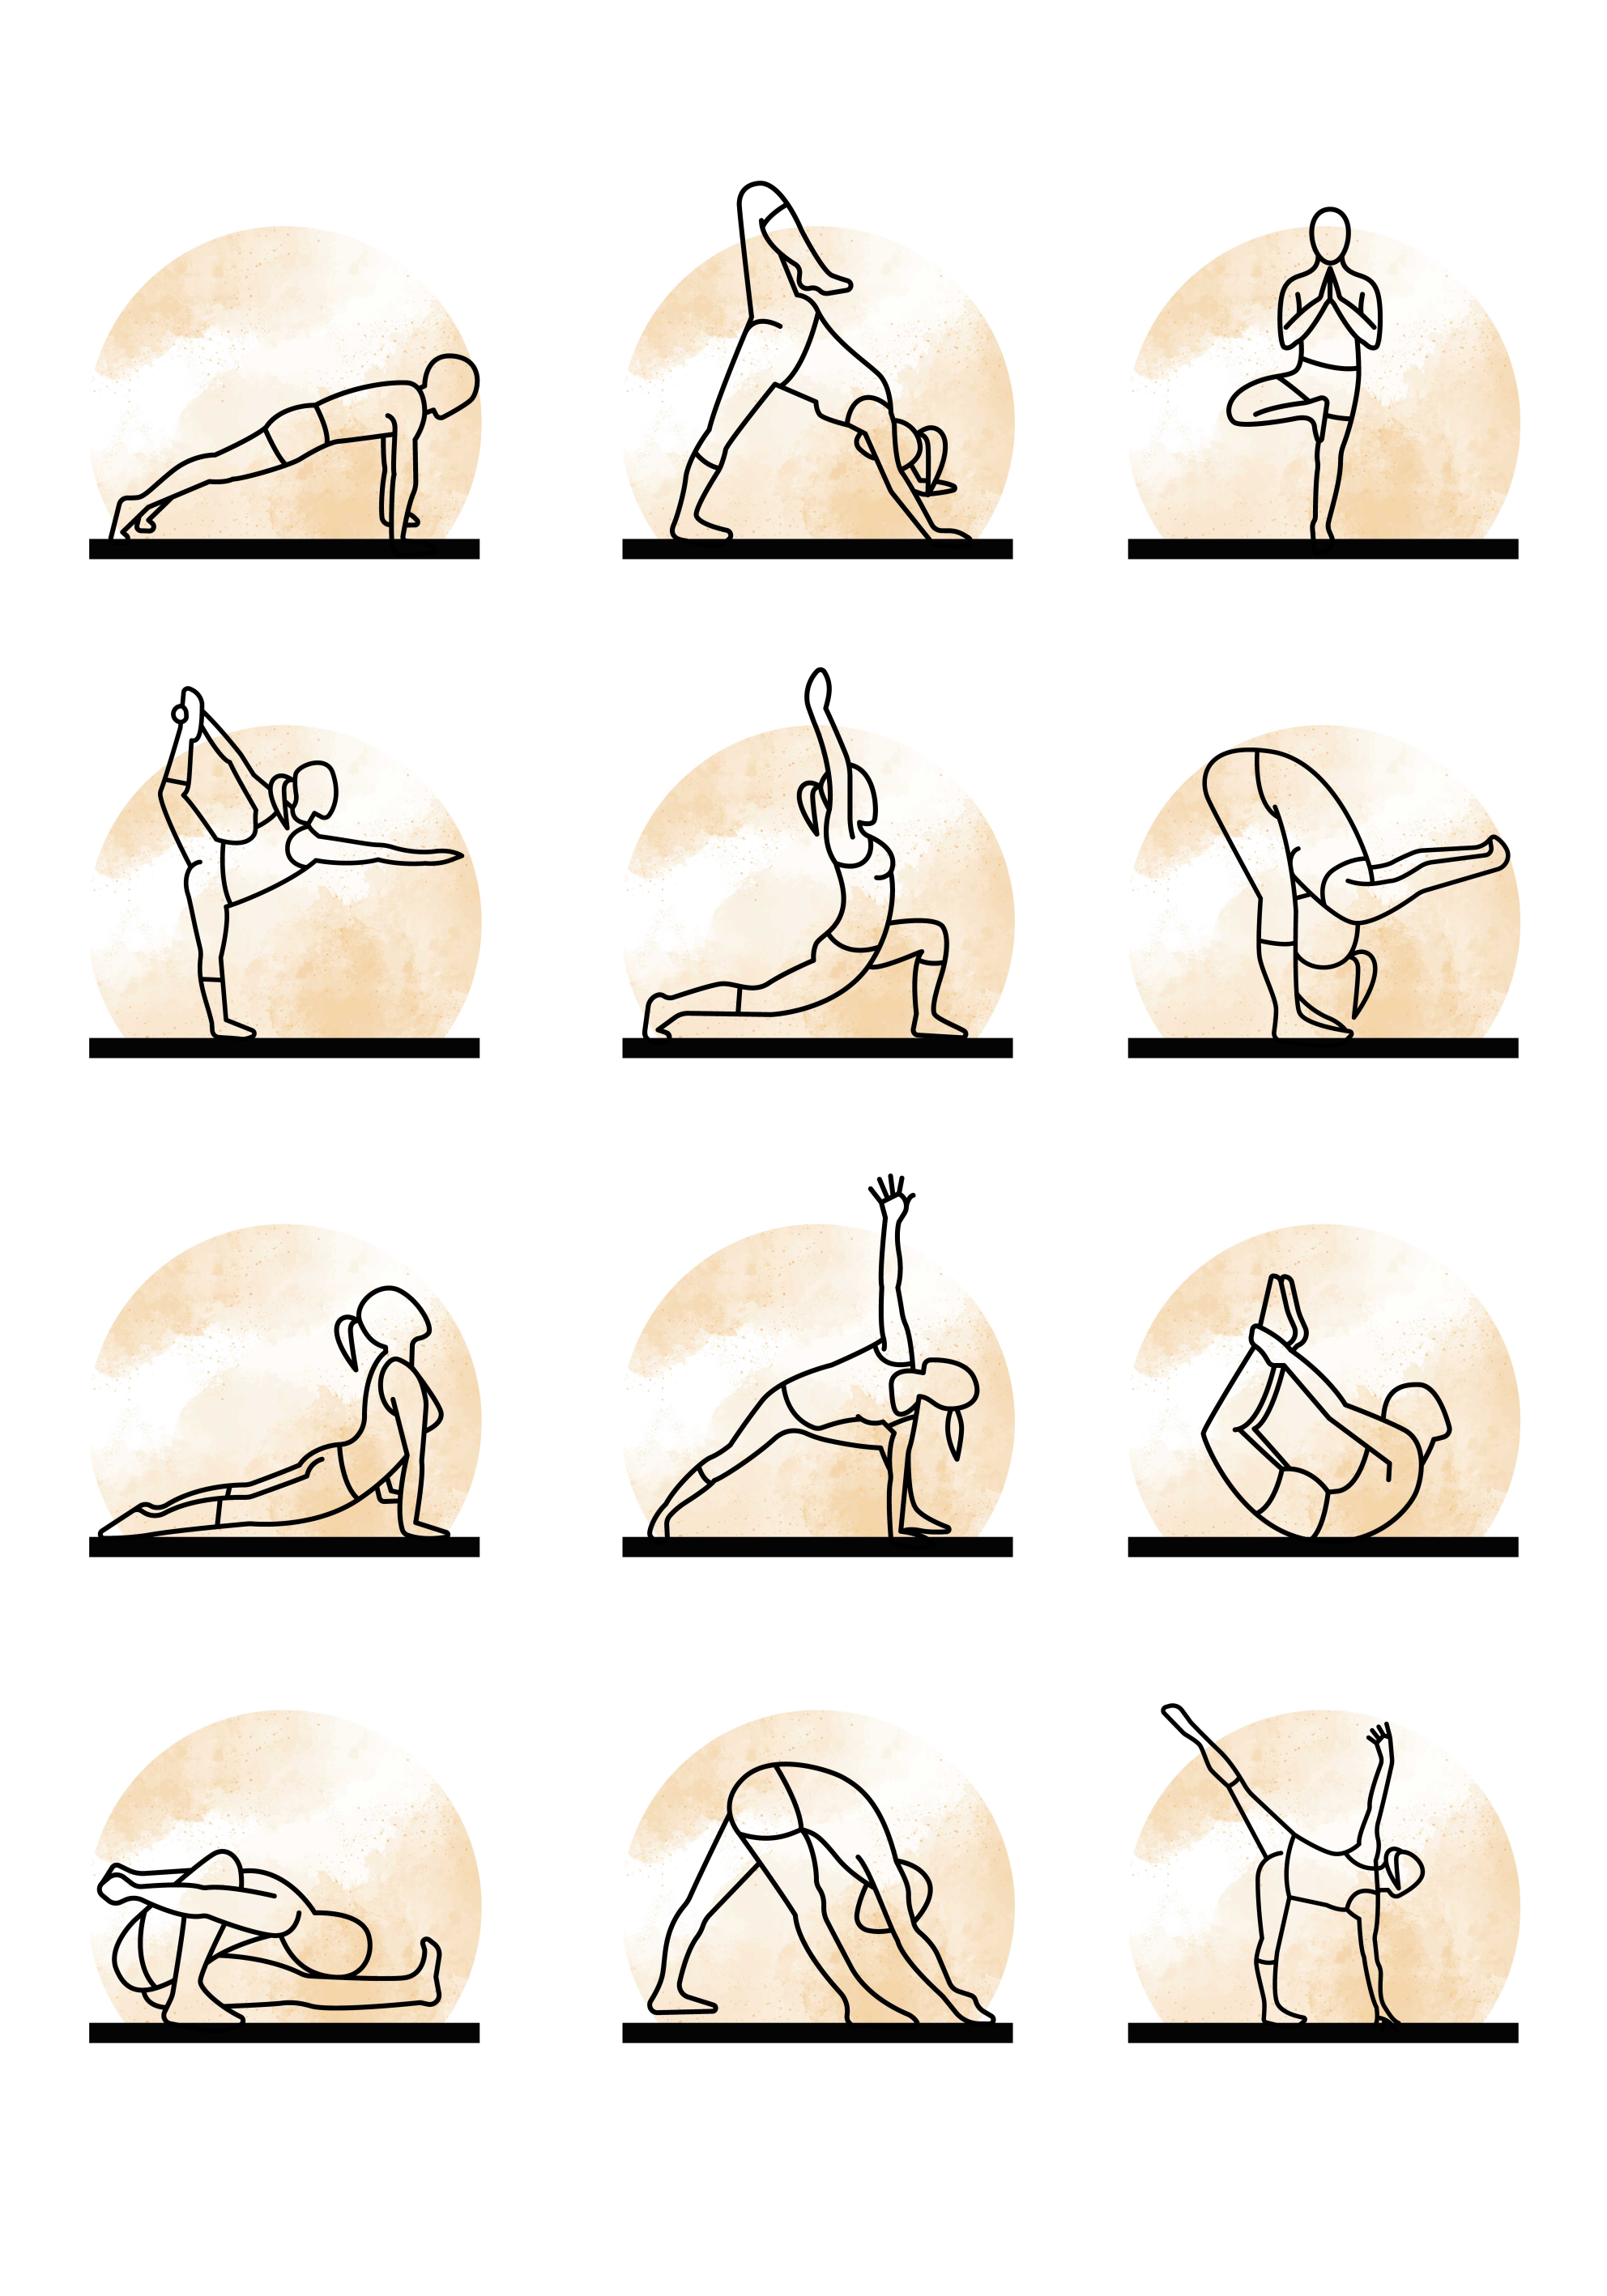 Amazon.com: Kids Yoga Poster Kid Chakra With Poses For Childrens Exercise  Activities Wall Chart Cool Wall Decor Art Print Poster 12x18 : Sports &  Outdoors